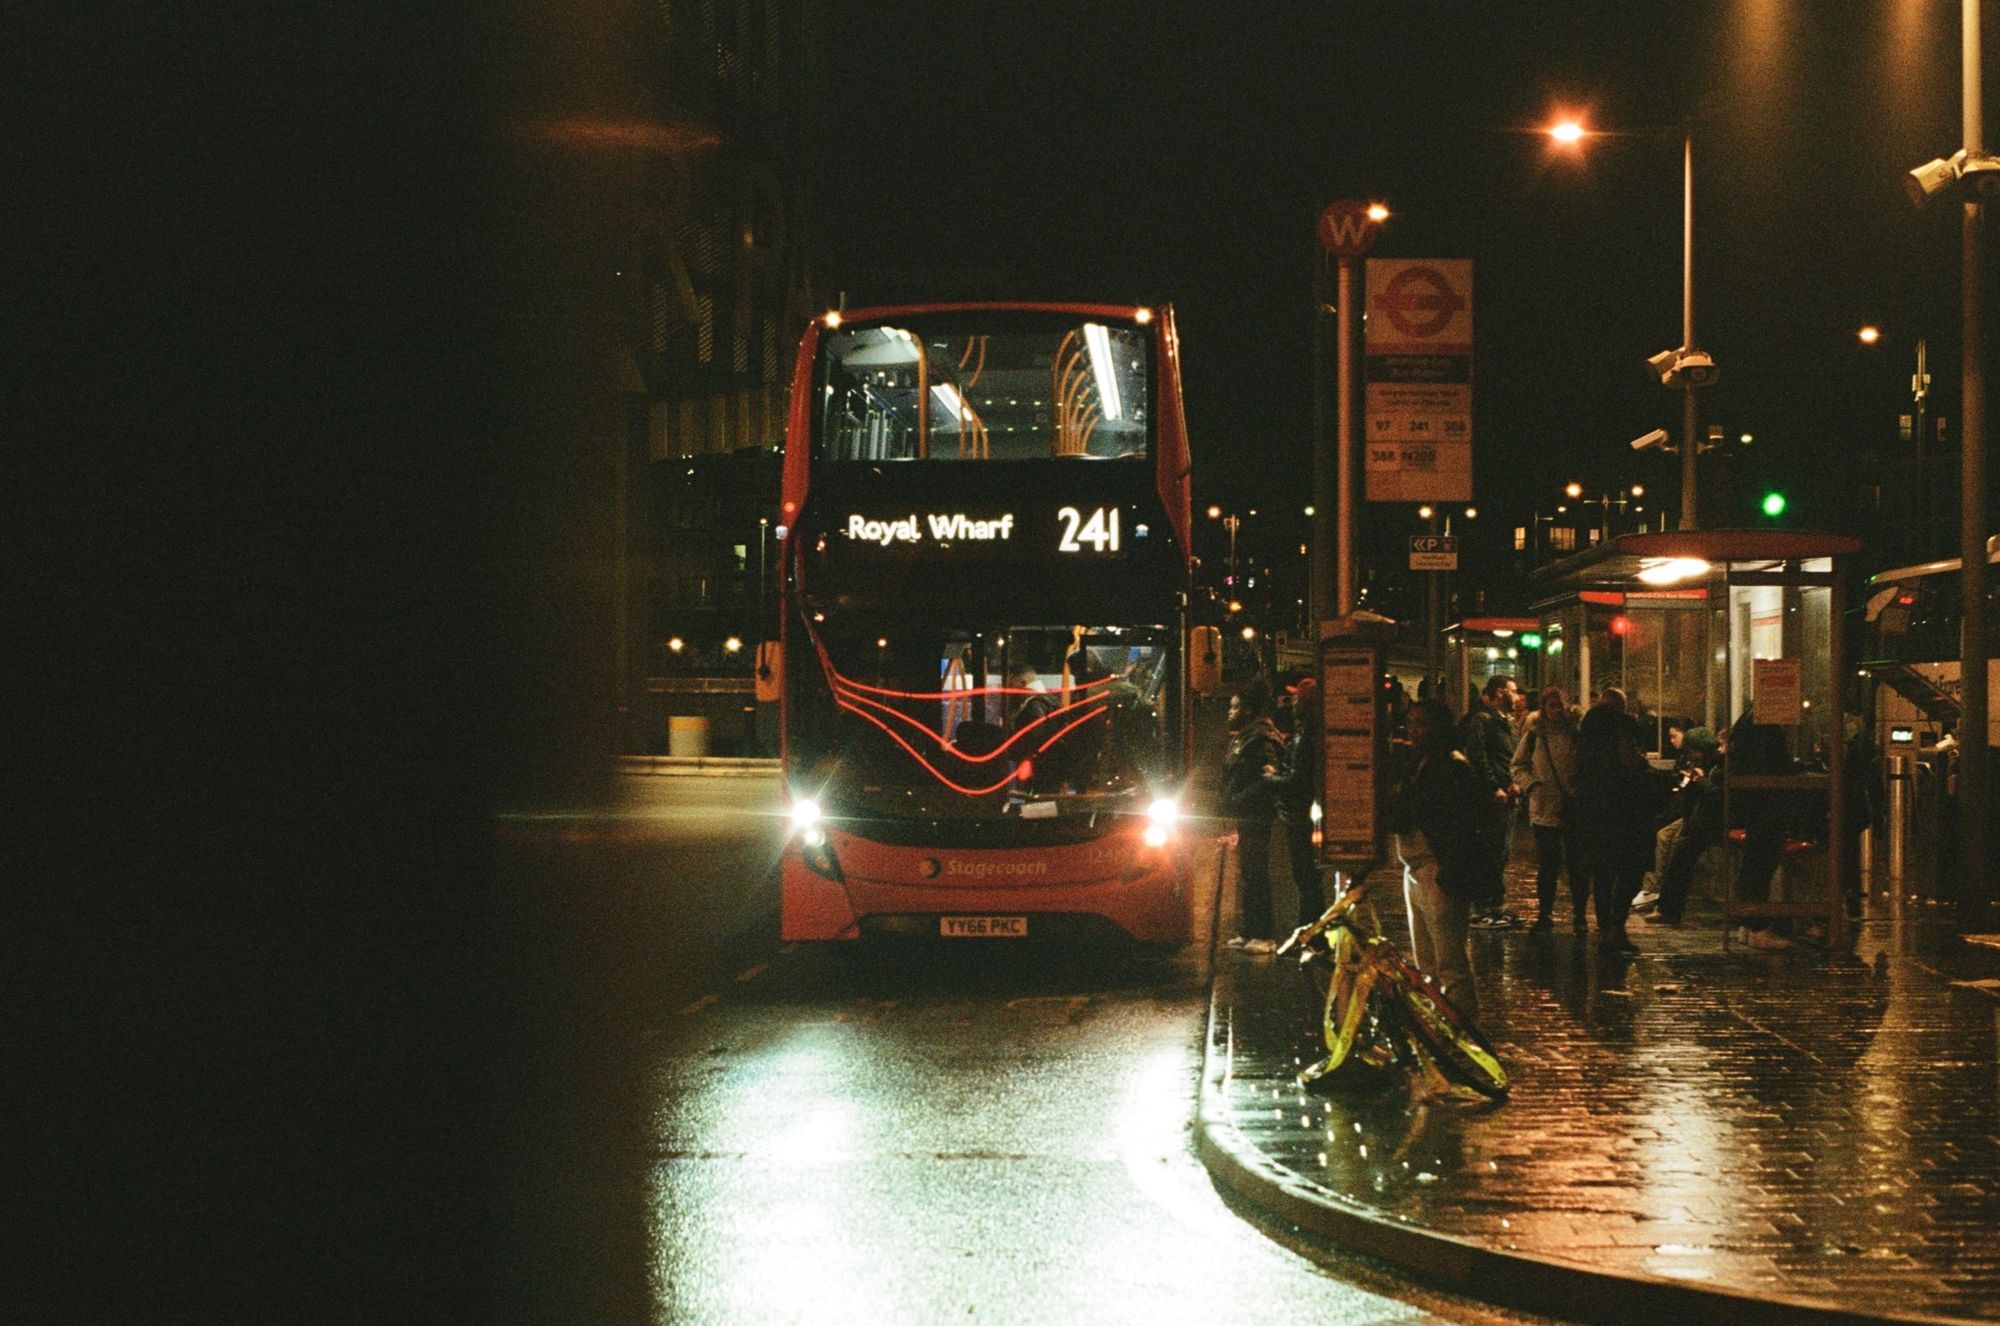 A rainy bus station. A red double-decker bus (the 241 for Royal Wharf) is boarding. Three neon strip lights reflect into the windscreen.